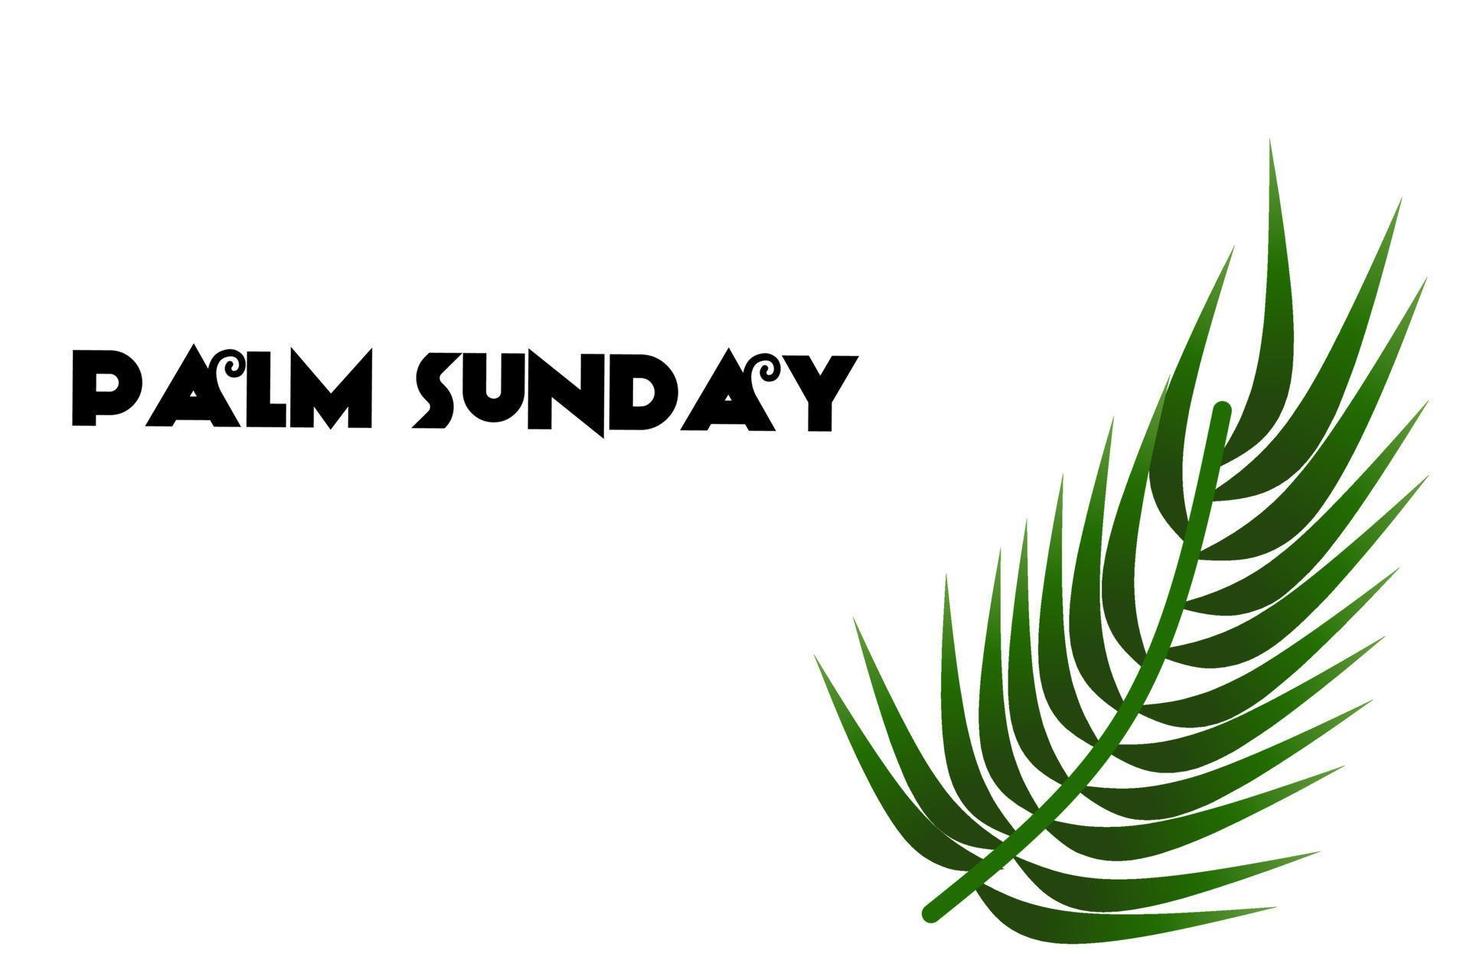 Palm Sunday background with a green leaf theme. Vector illustration